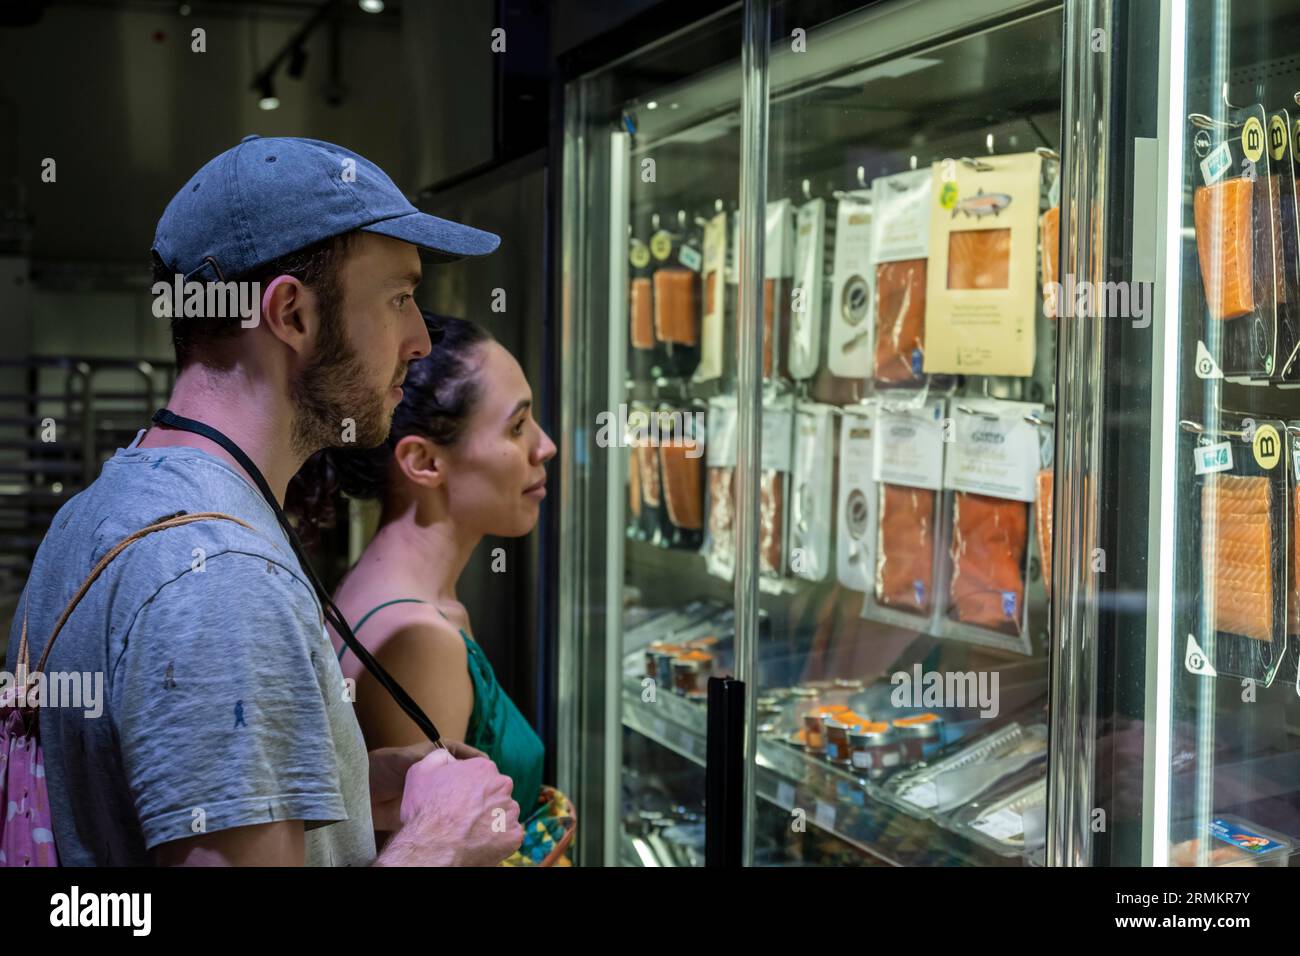 Two people looking for food in a supermarket, Switzerland Stock Photo